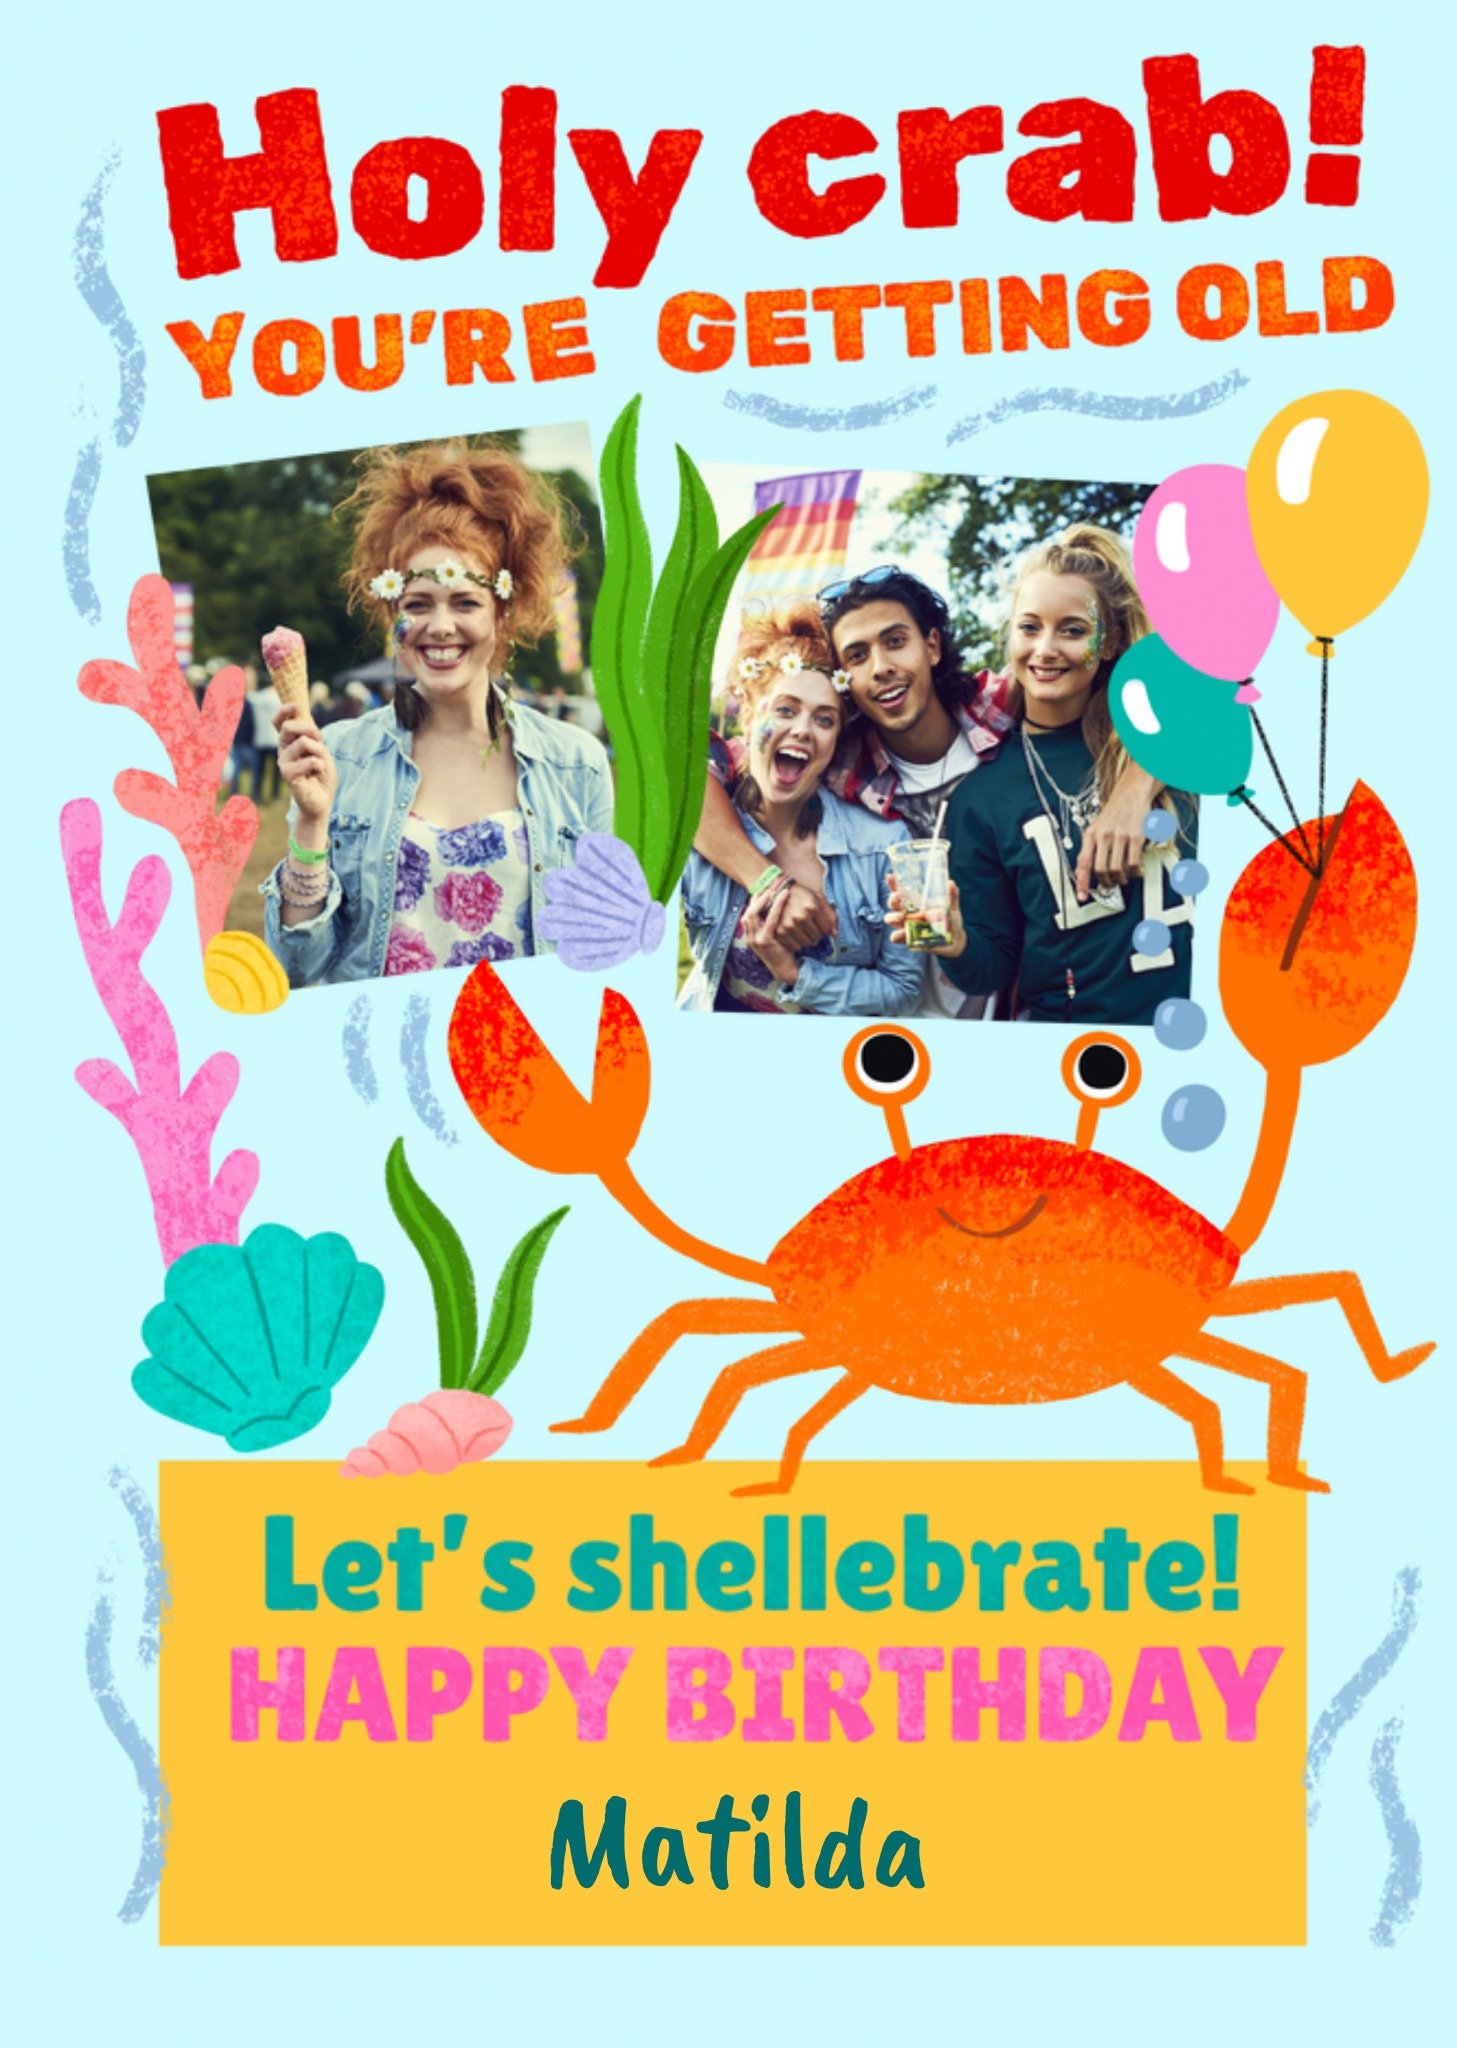 Moonpig Fun Holy Crab You Are Getting Old Illustrated Crab Photo Upload Birthday Card, Large